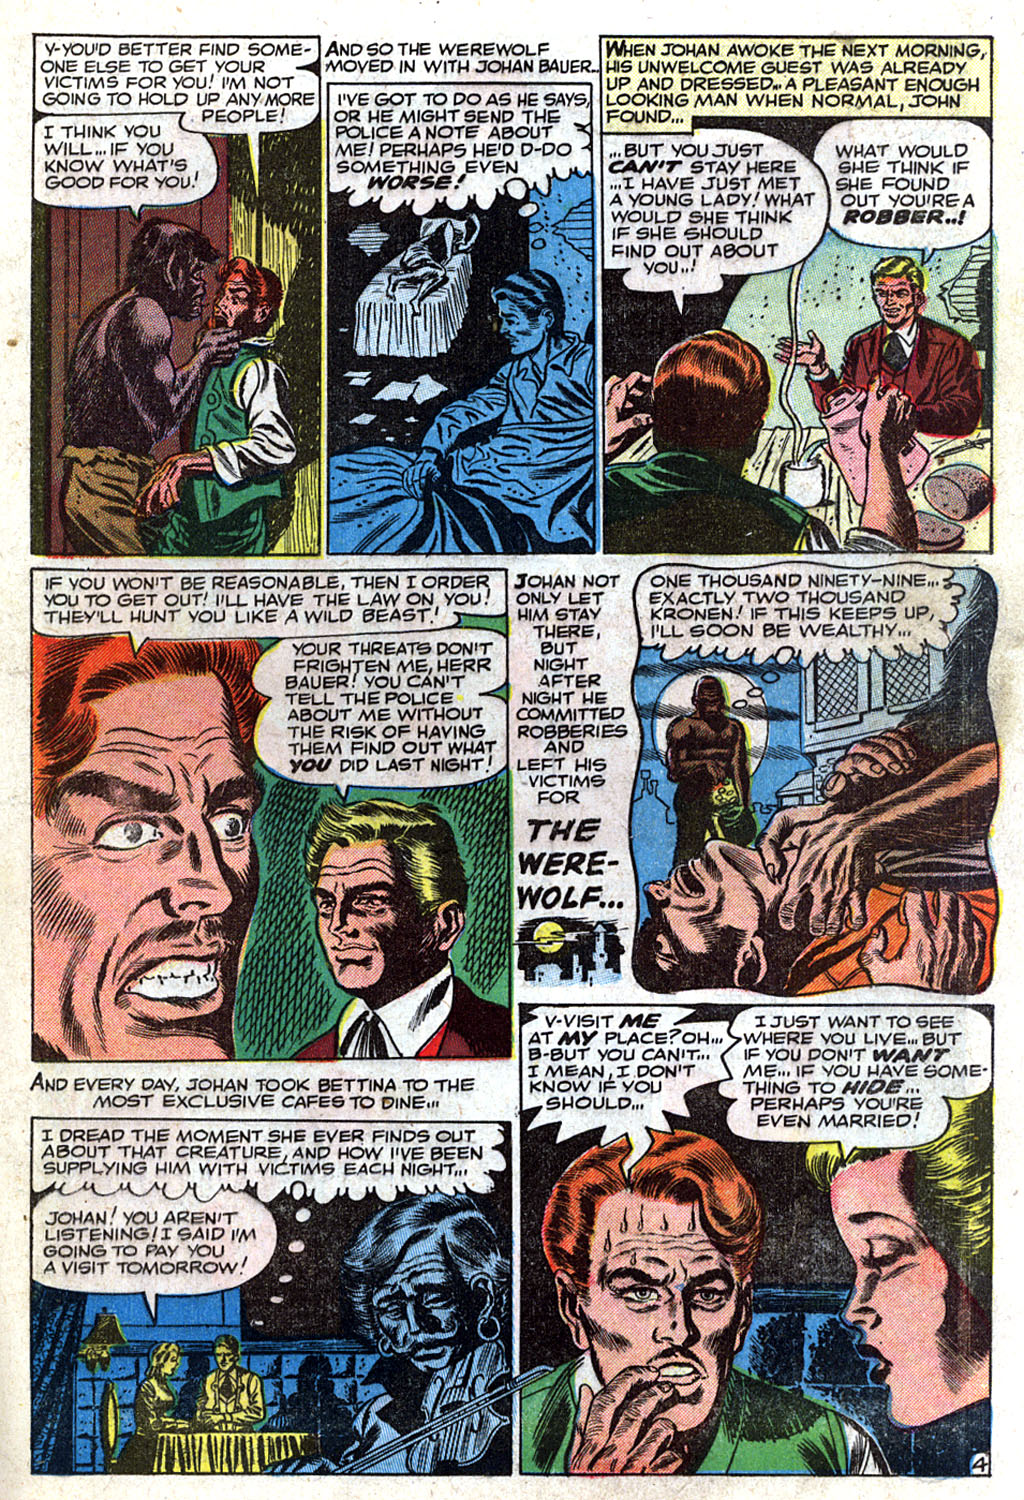 Marvel Tales (1949) 116 Page 11